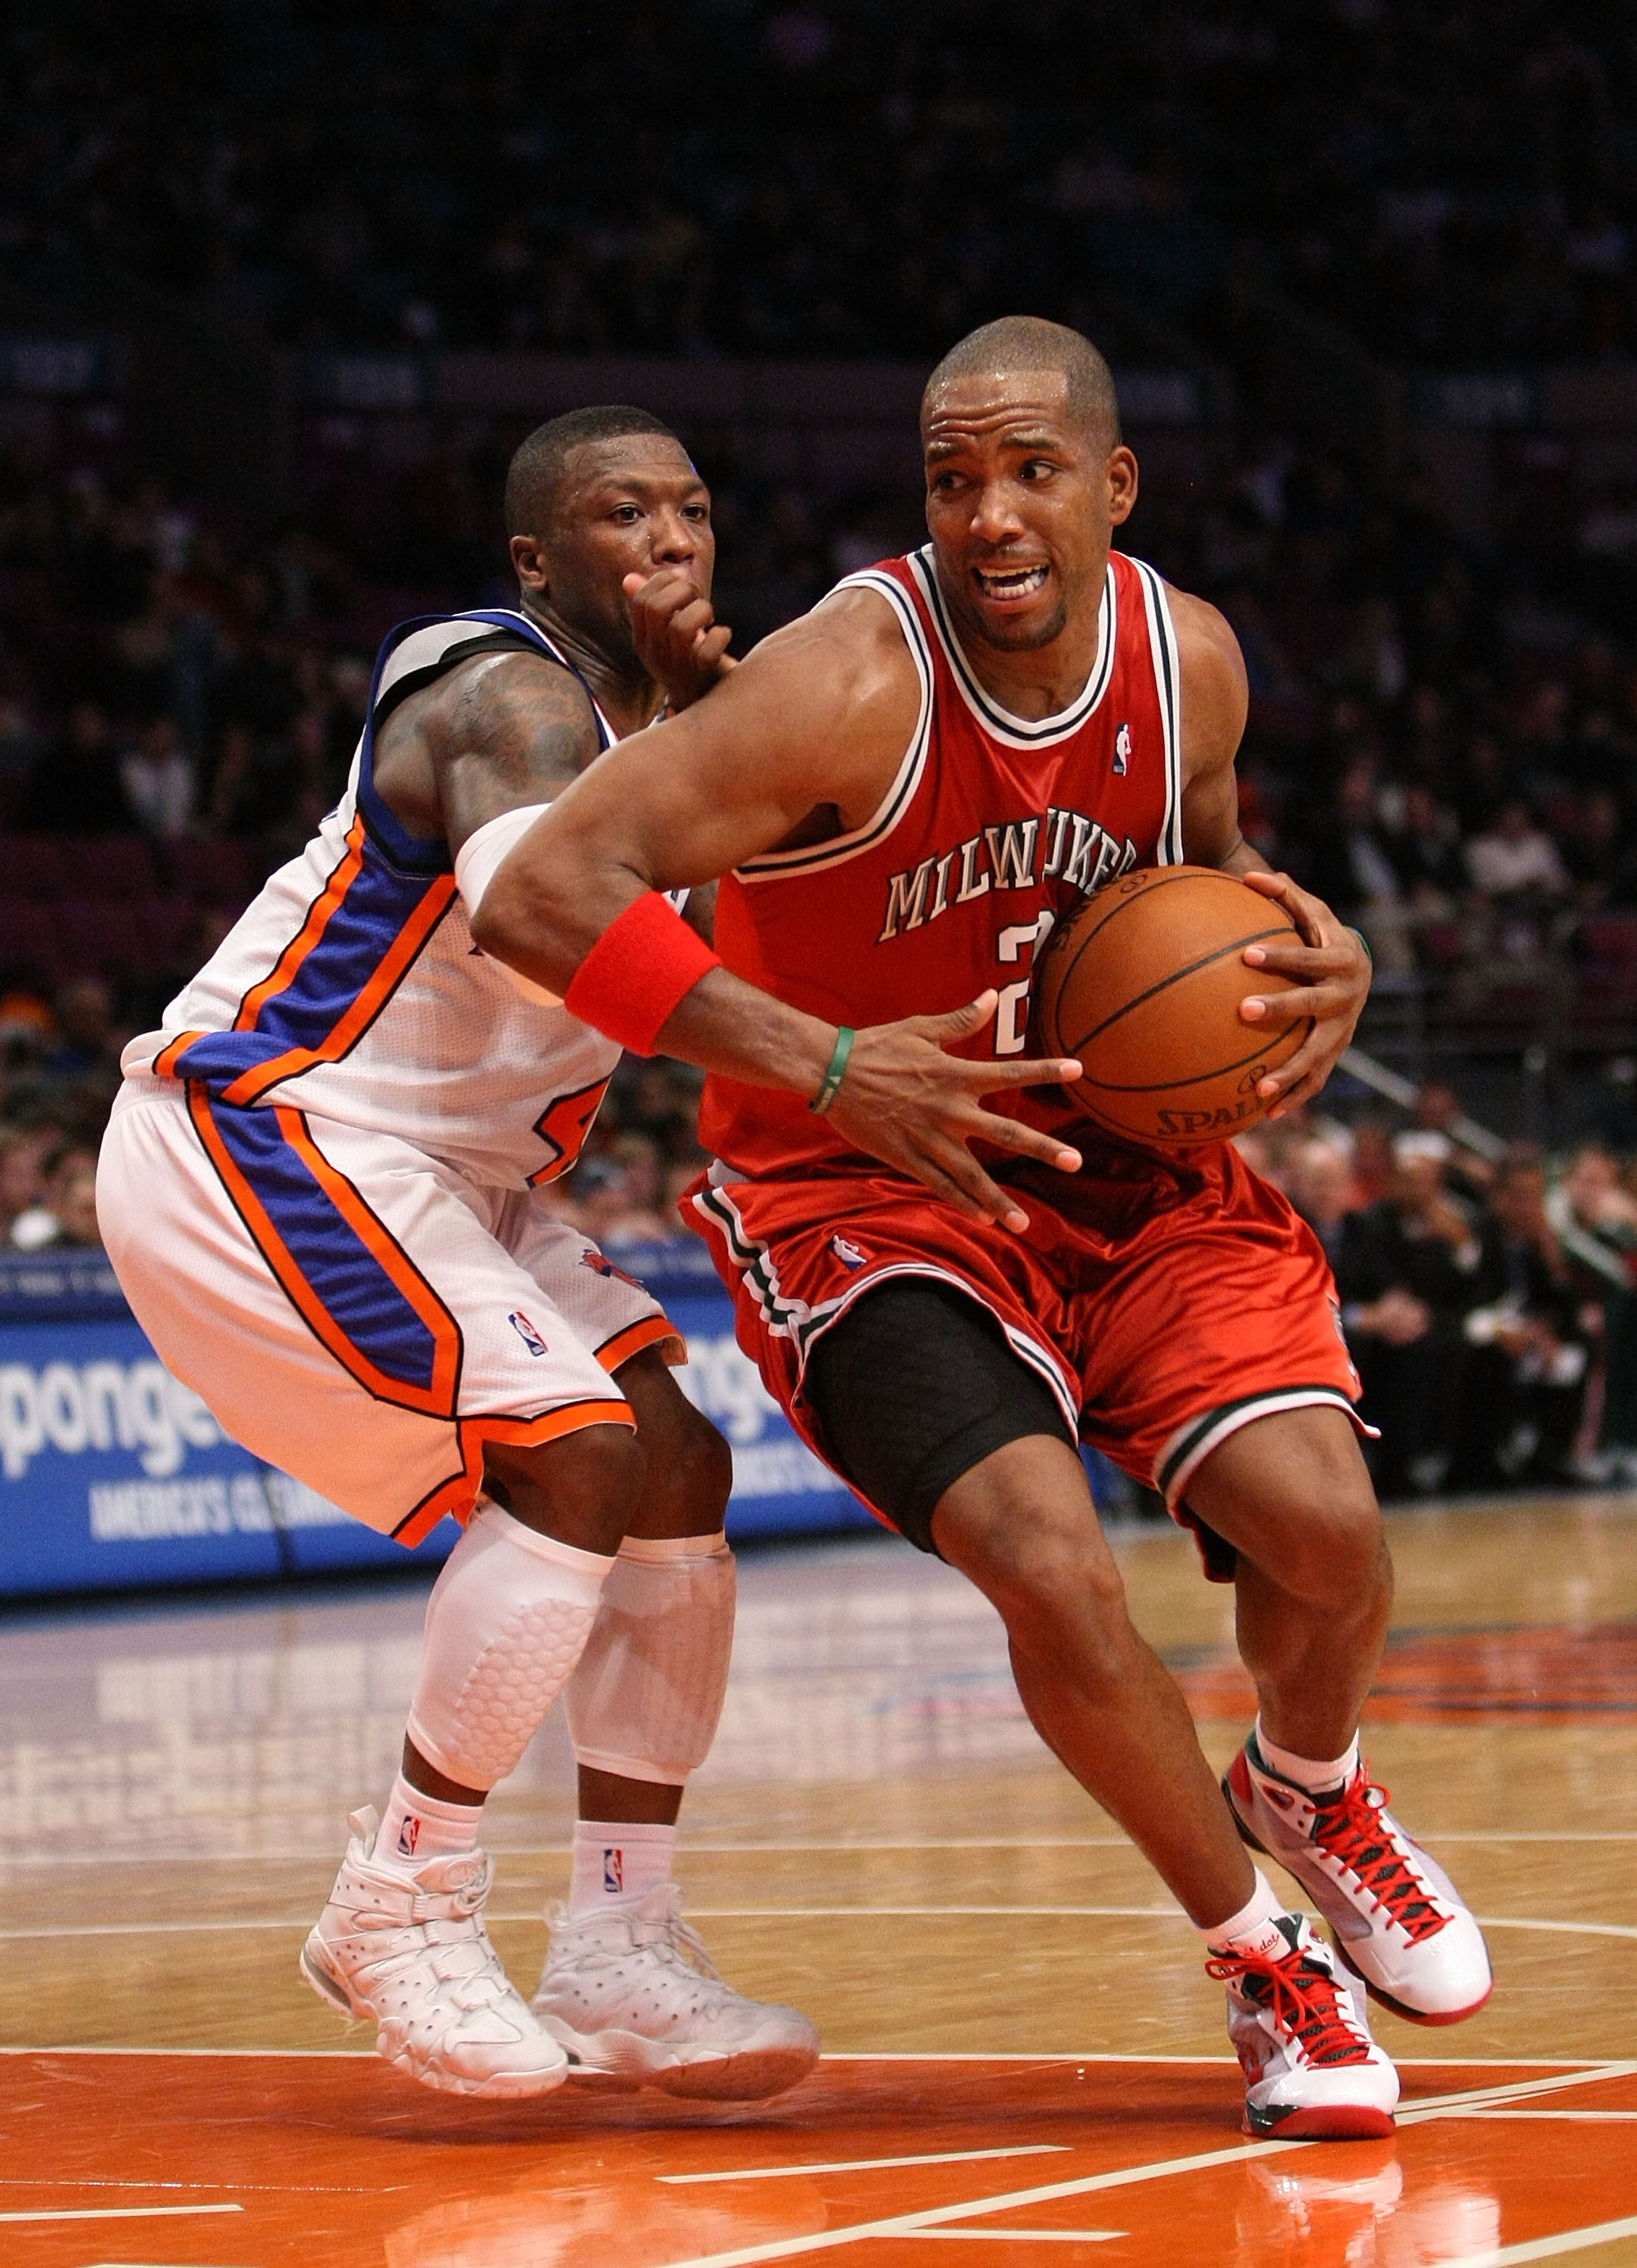 NEW YORK - DECEMBER 19: Michael Redd #22 of the Milwaukee Bucks drives to the basket against Nate Robinson #4 of the New York Knicks on December 19, 2008 at Madison Square Garden in New York City, New York. NOTE TO USER: User expressly acknowledges and ag